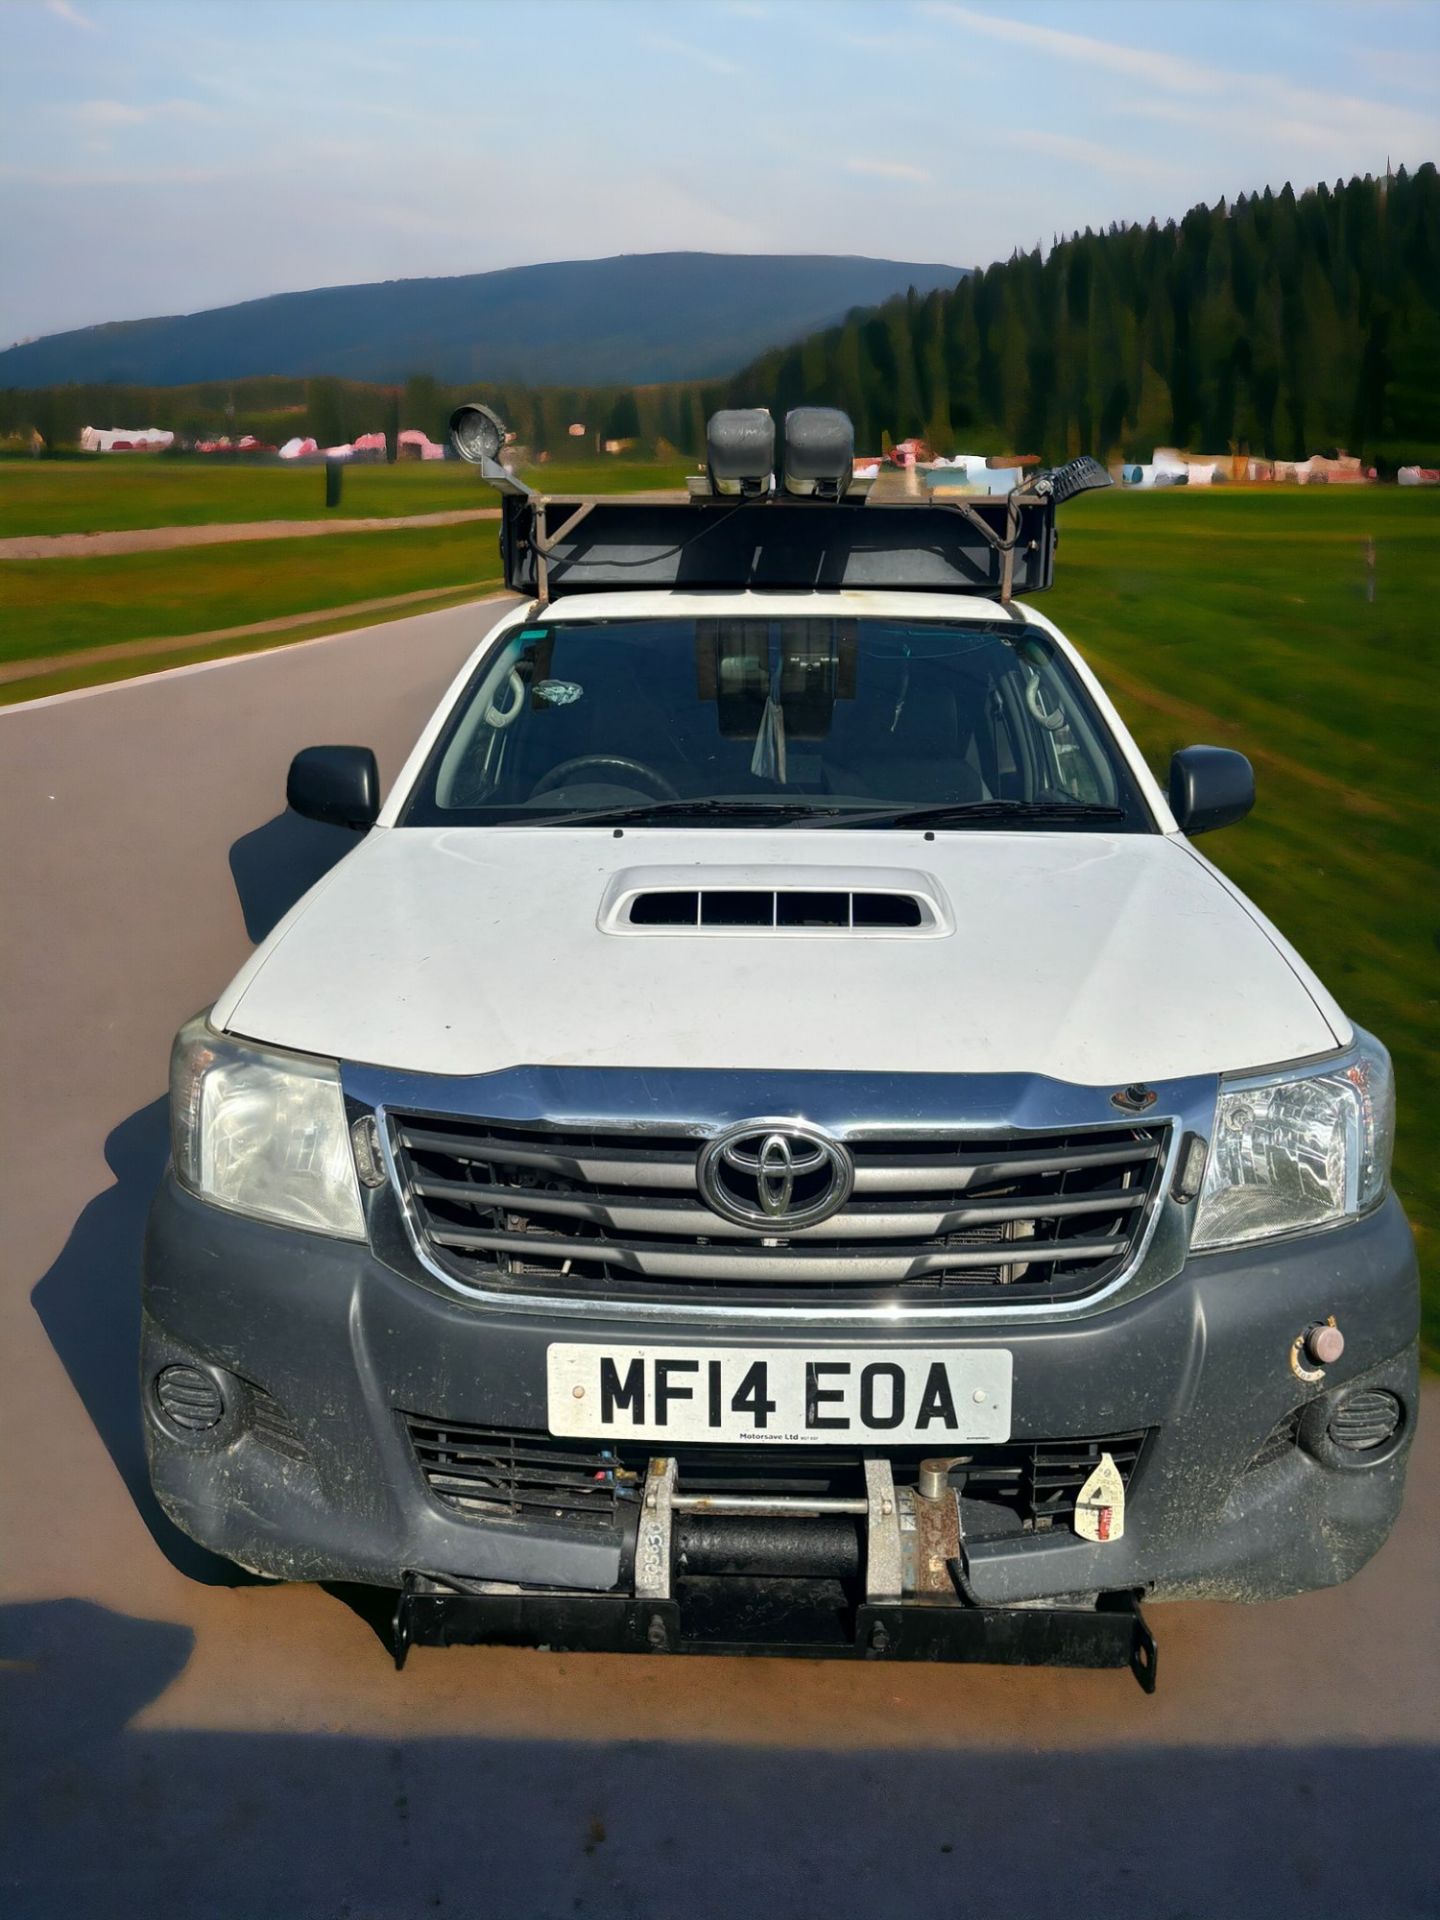 TOYOTA HILUX KING CAB PICKUP TRUCK - Image 2 of 8